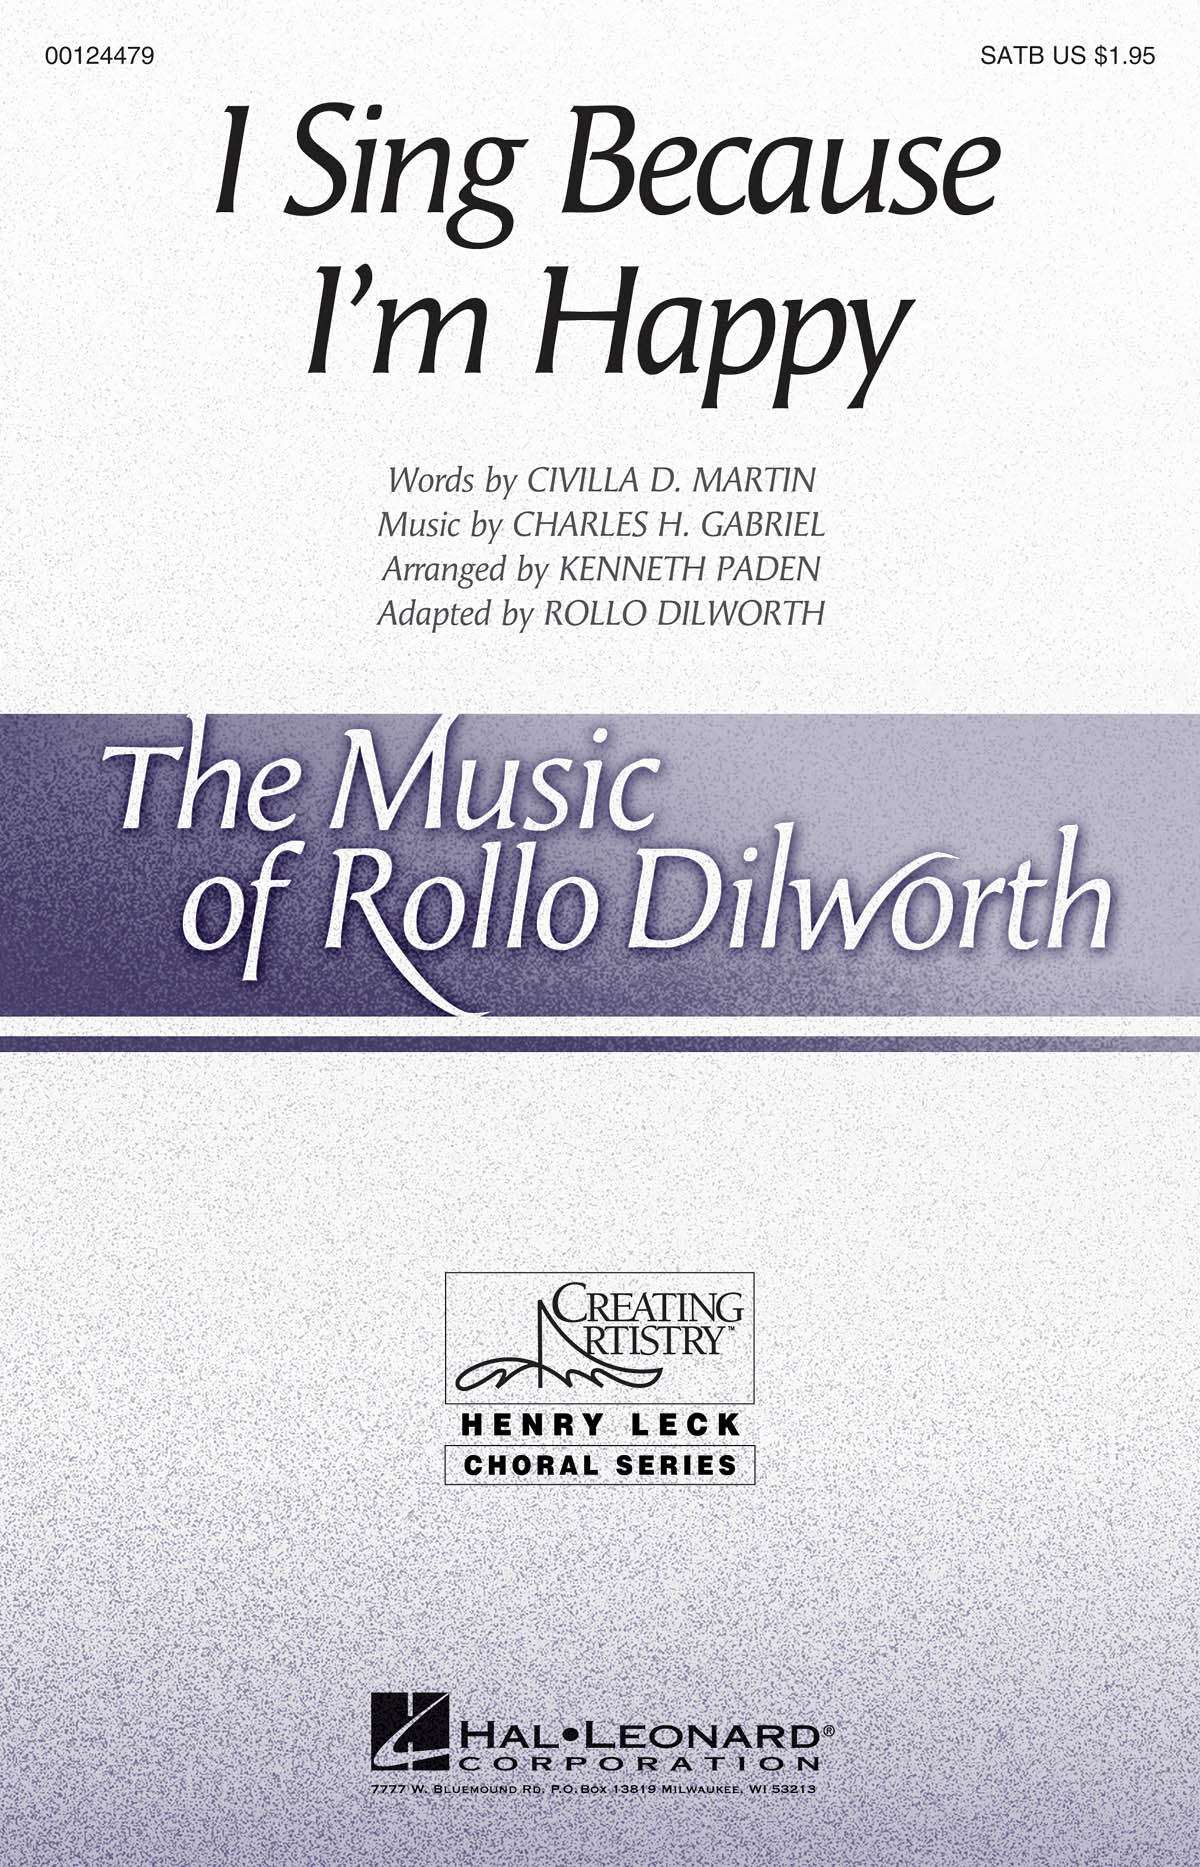 I Sing Because I'm Happy - Henry Leck Choral Series - pro sbor SATB